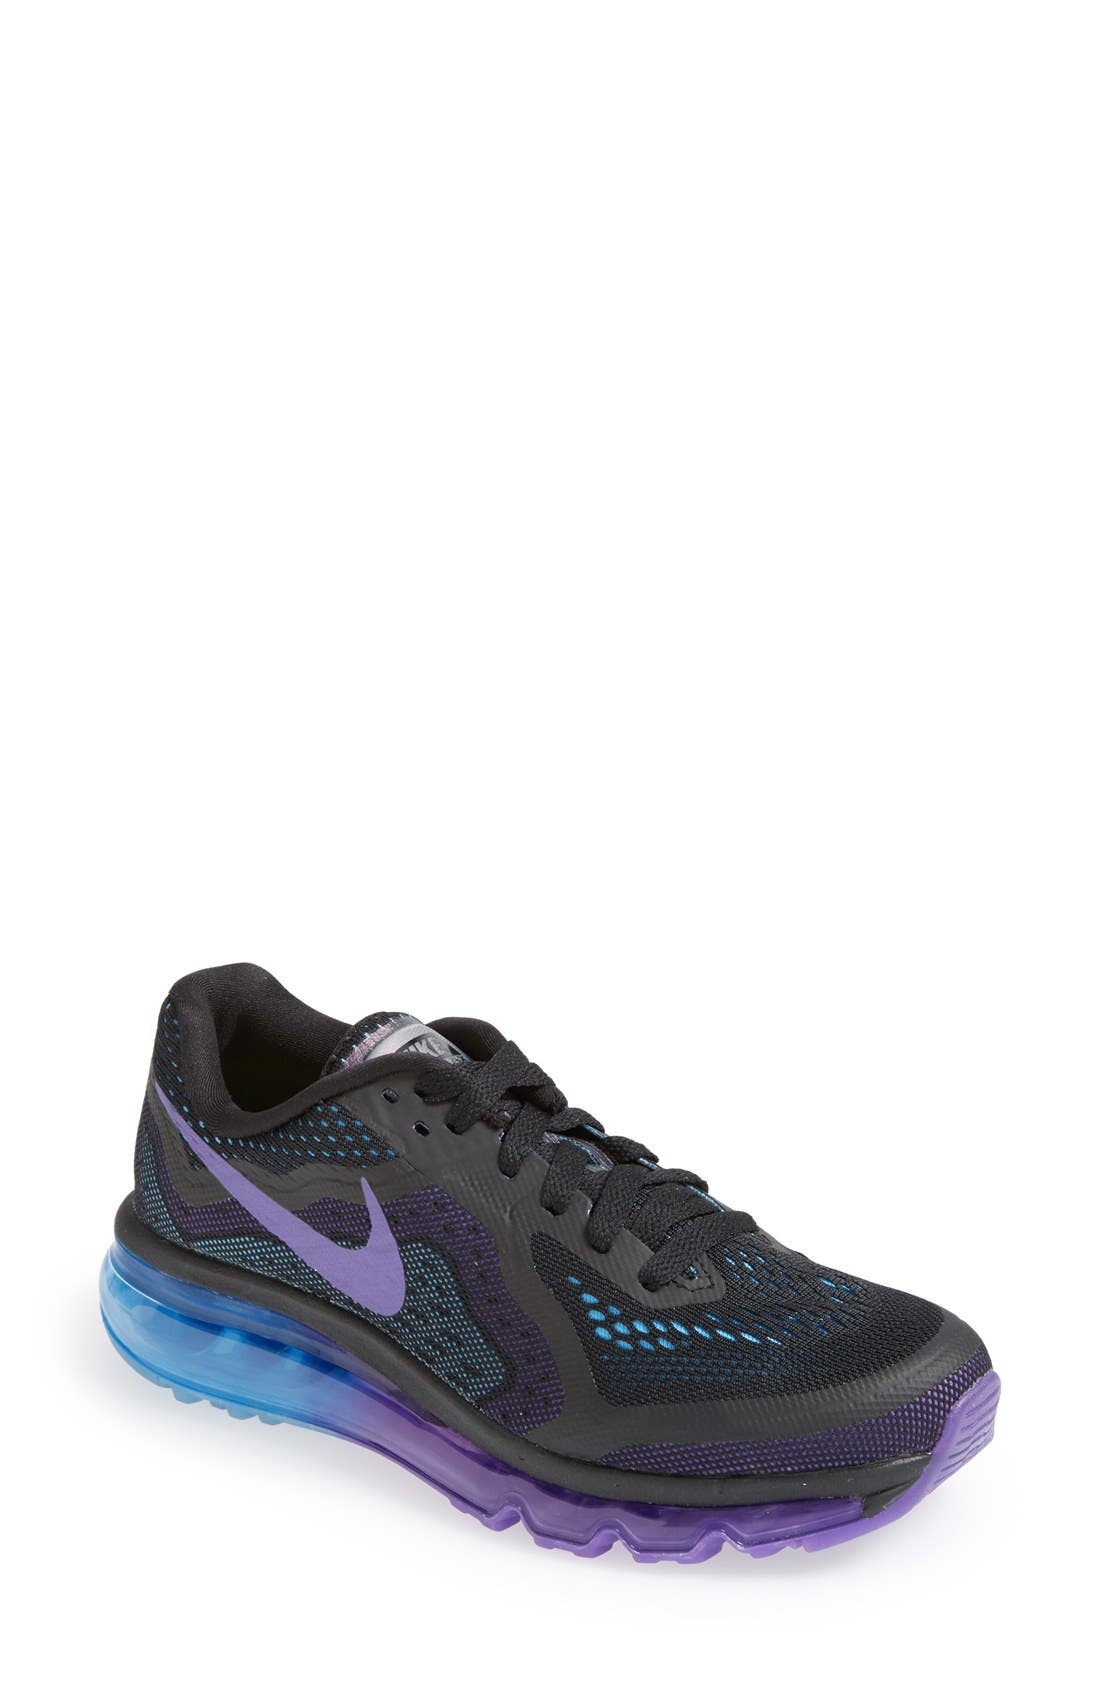 2014 air max for women